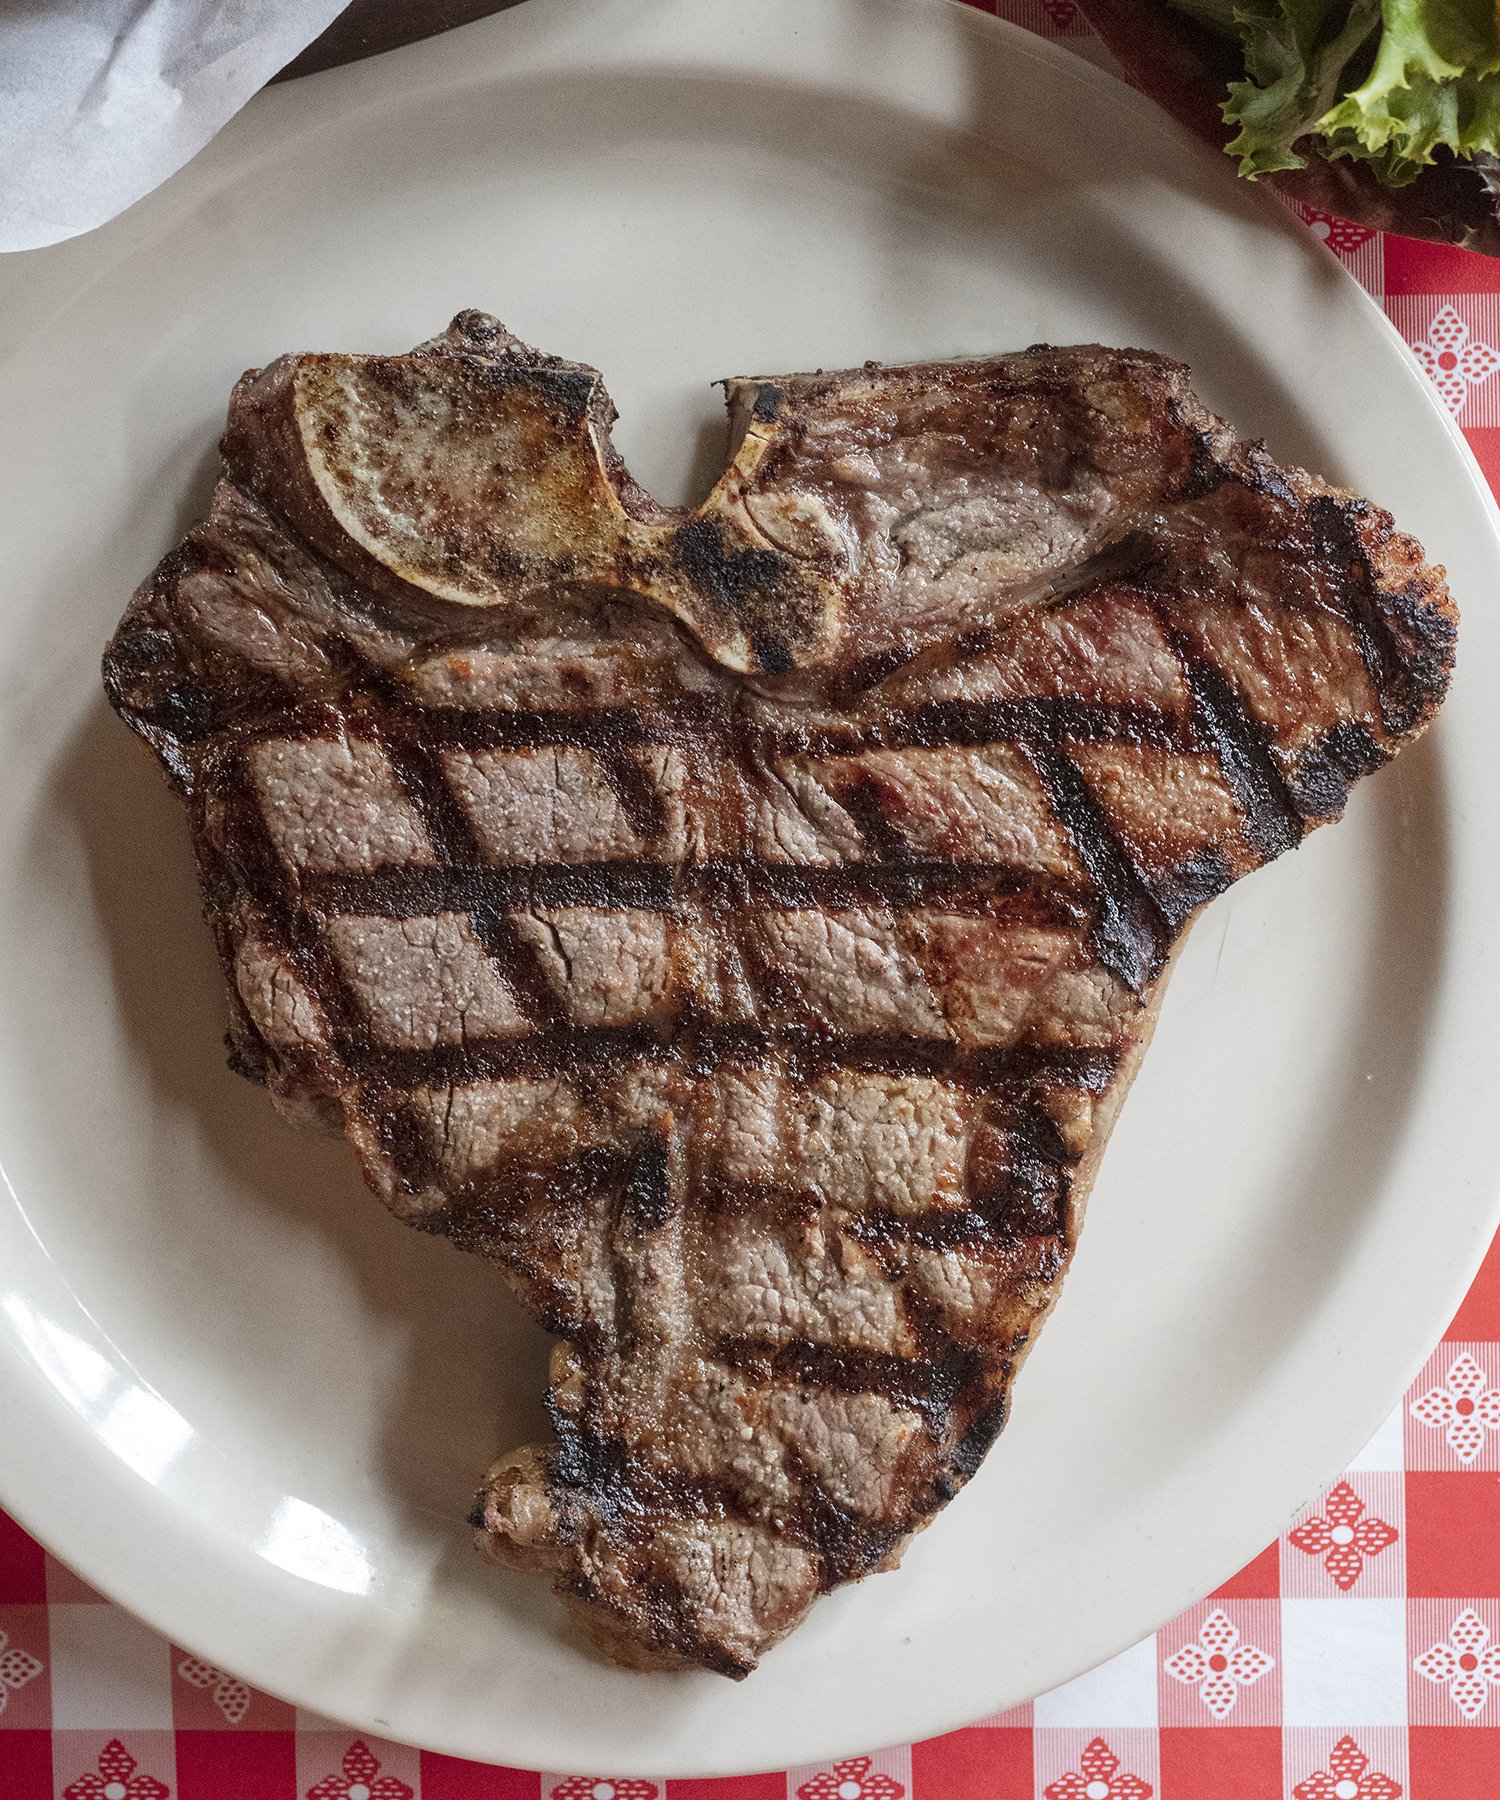 Cowboy Steak with grill marks on picnic table cloth